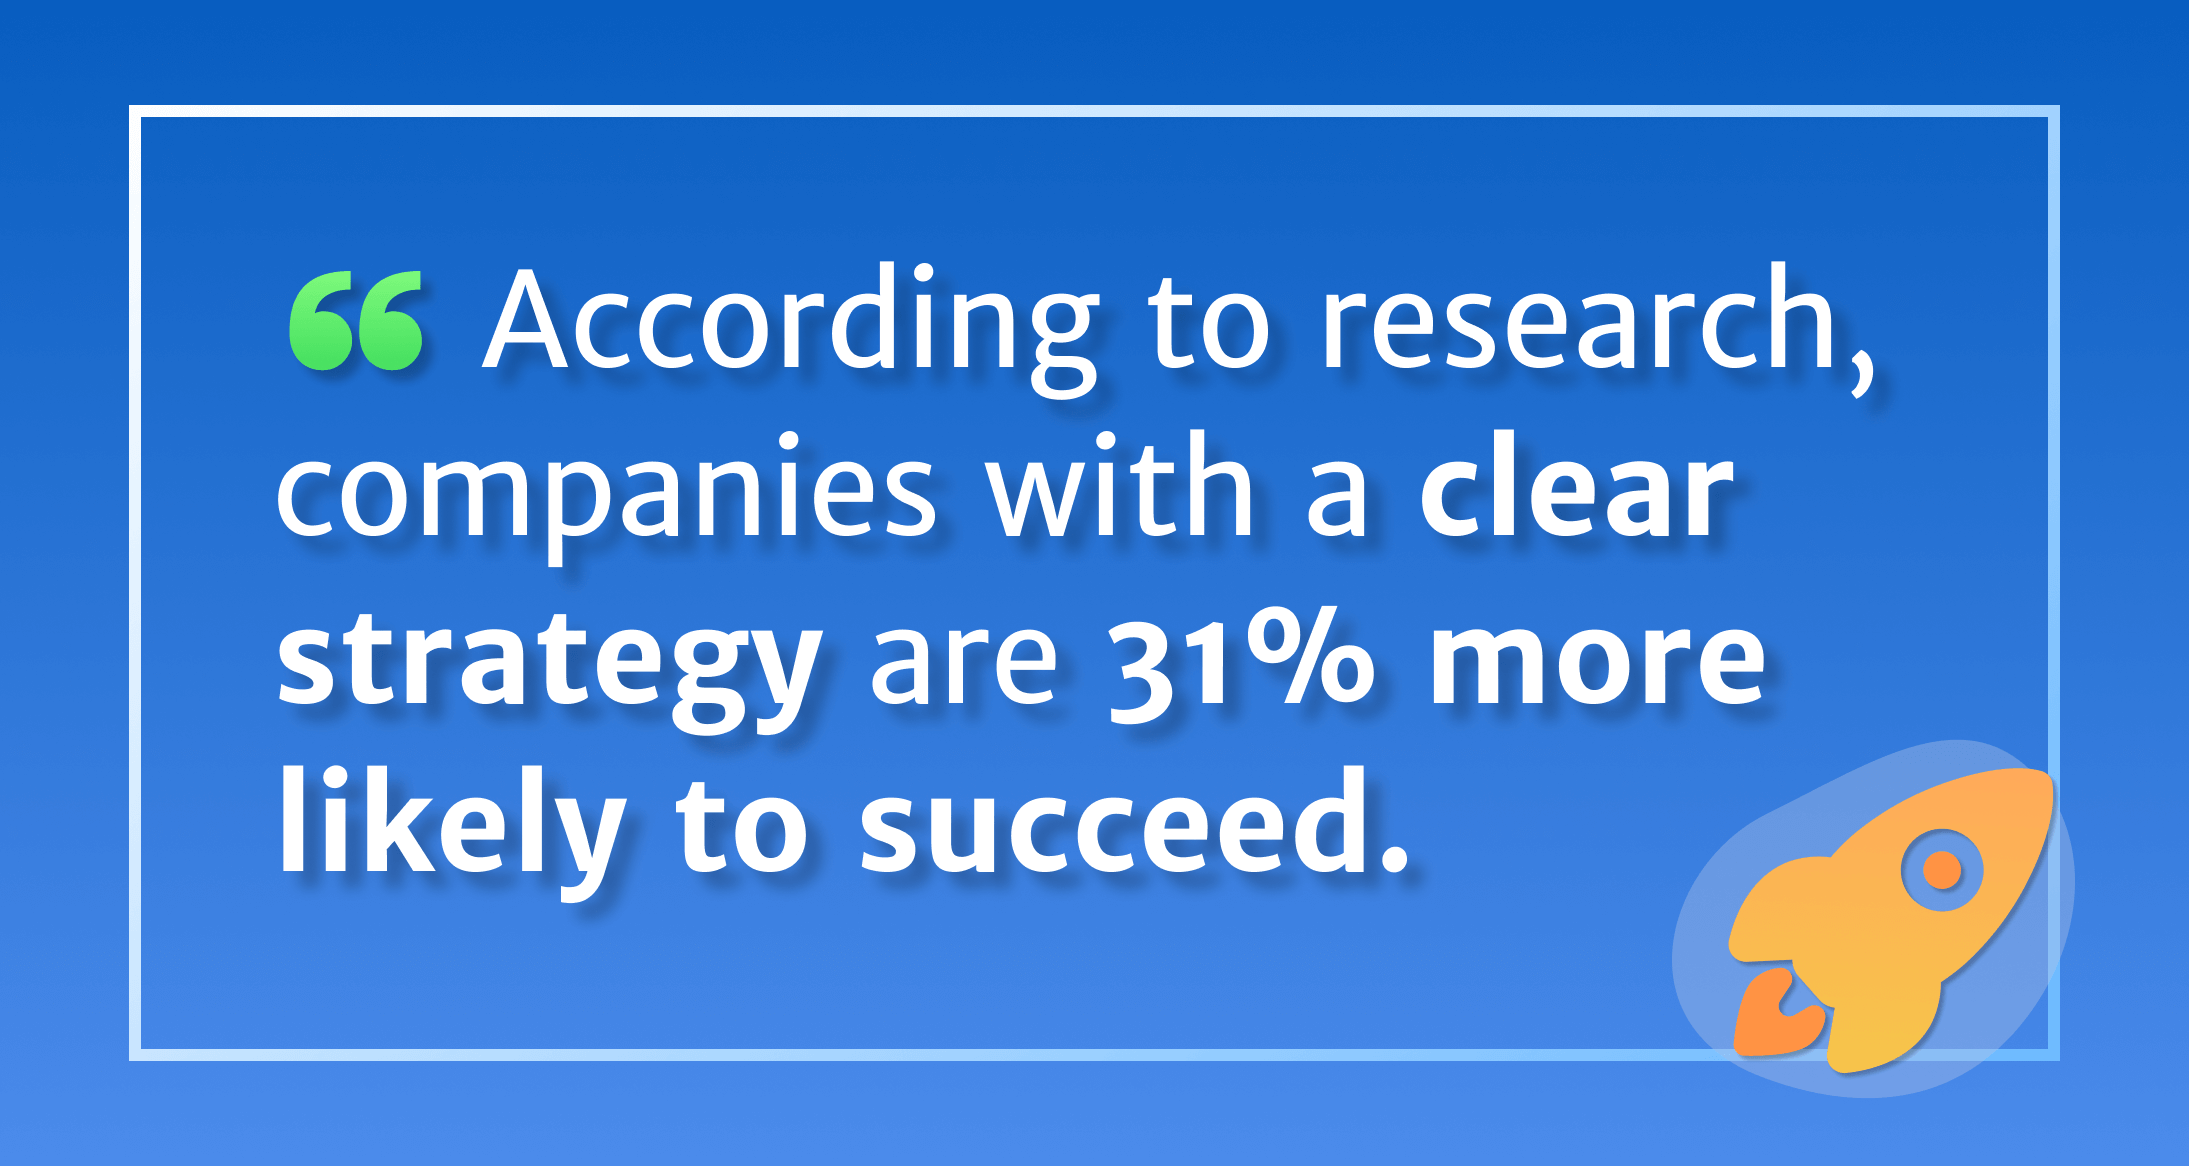  According to research, companies with a clear strategy are 31% more likely to succeed. 